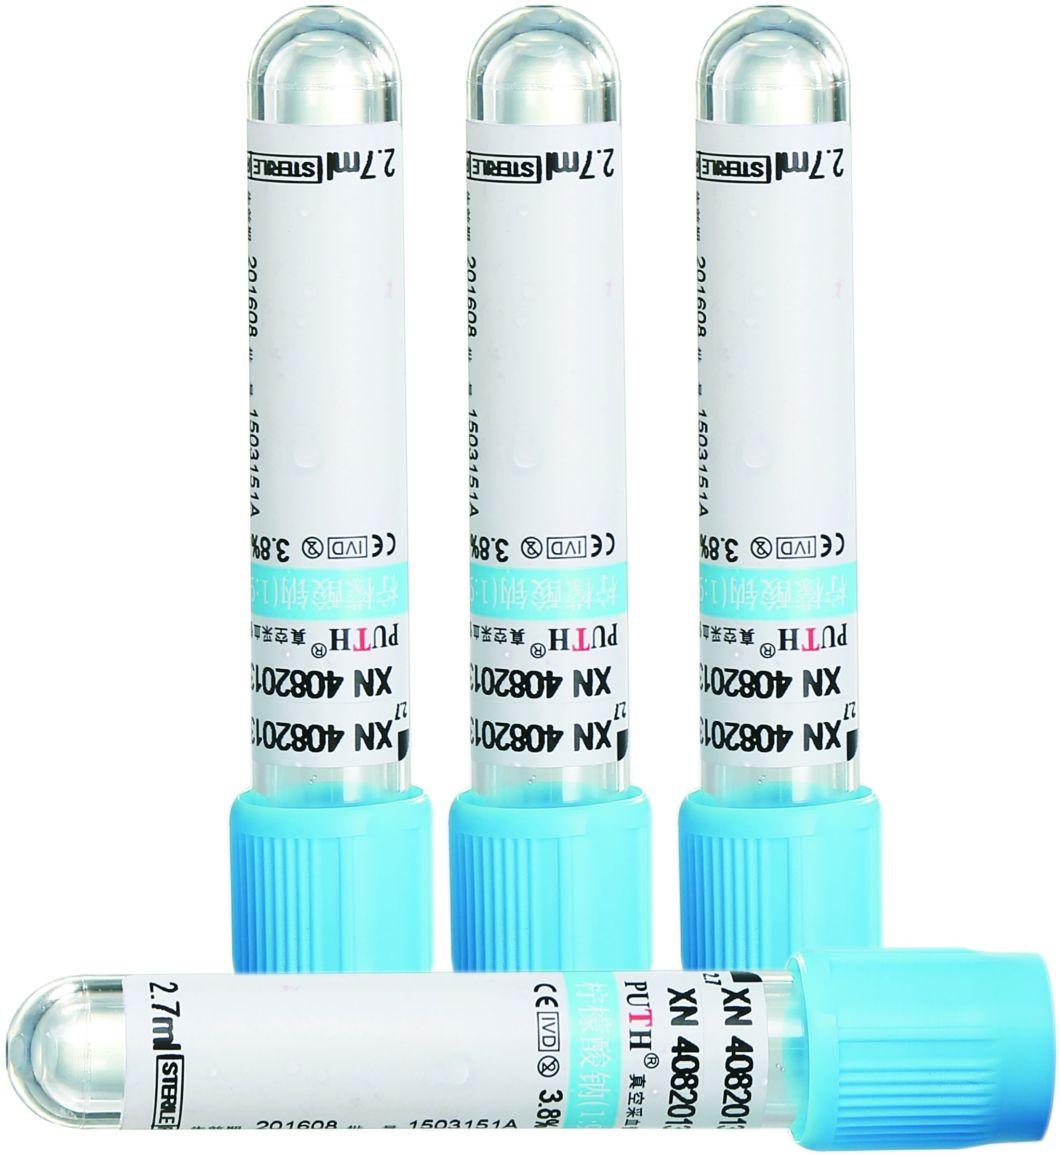 Blood Collection Tube, Sodium Citrate Tube, 9nc (3.8%) , Blue Cap with CE, ISO 13458-1.8ml